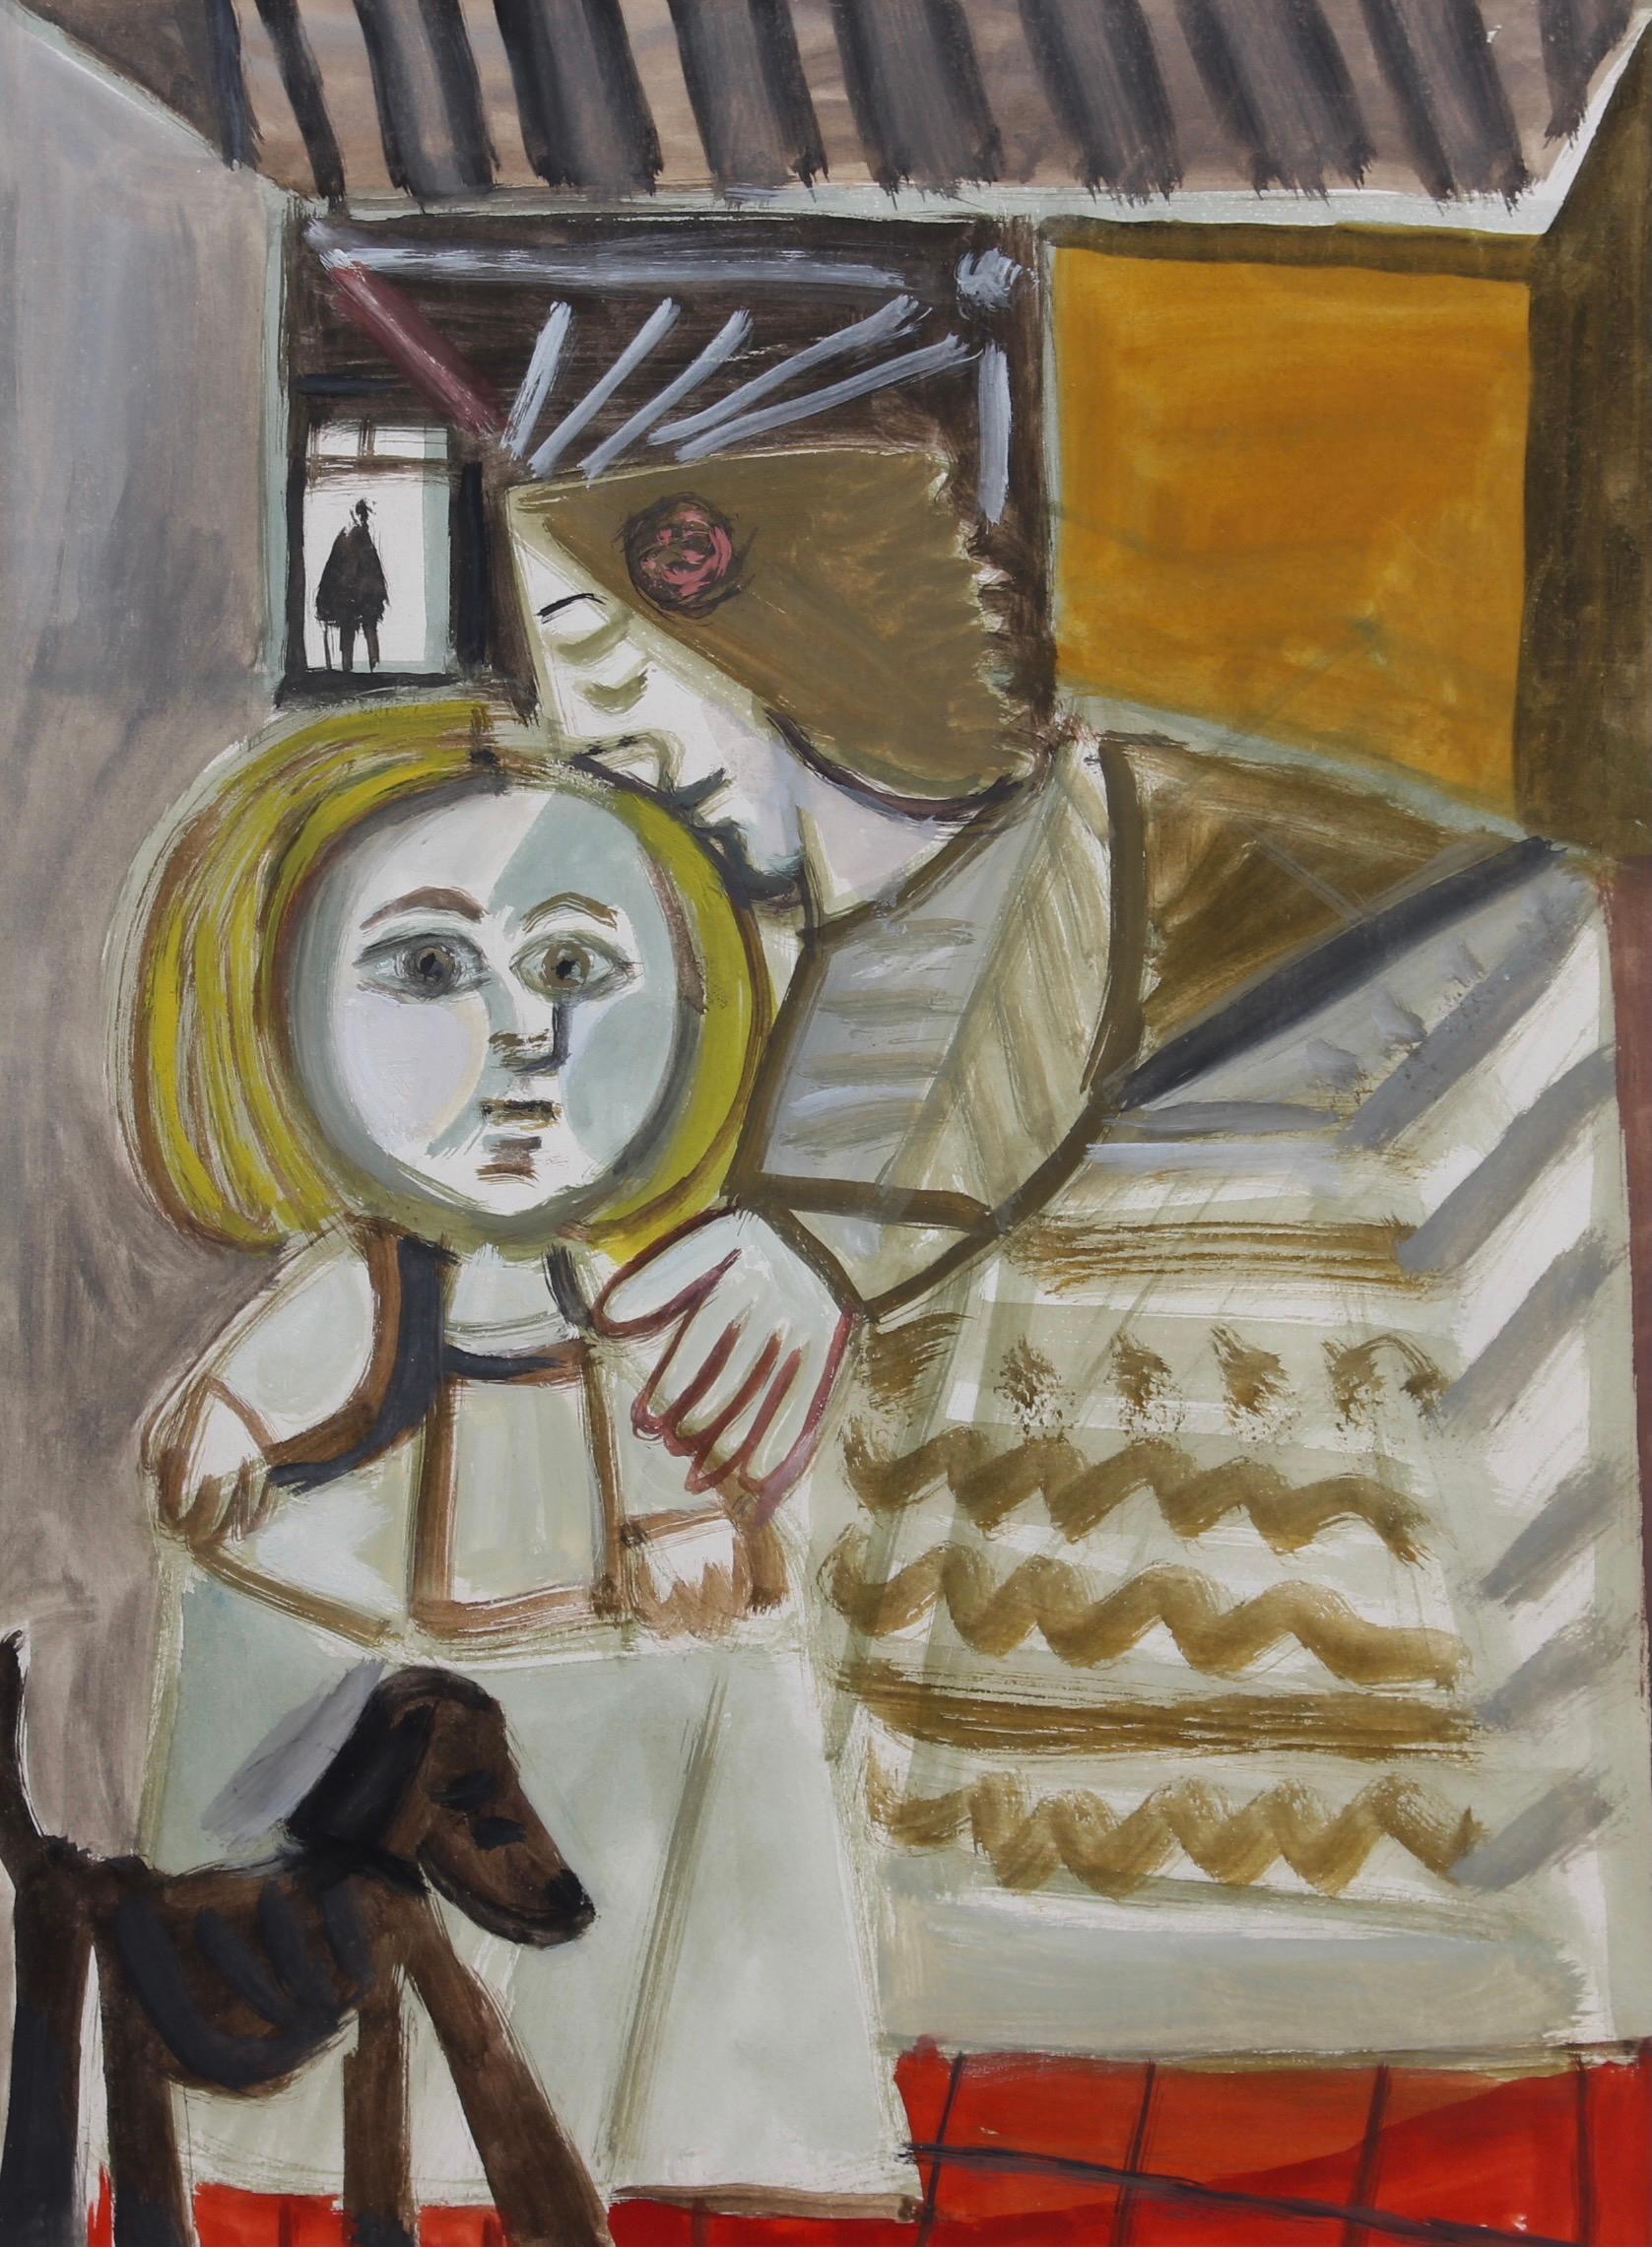 'The Family', gouache on fine art paper (1984), by Raymond Dèbieve. In a clear nod to Picasso's influence both stylistically and in terms of subject matter (Picasso painted nearly 40 works with this theme), Dèbieve painted this warm tribute to